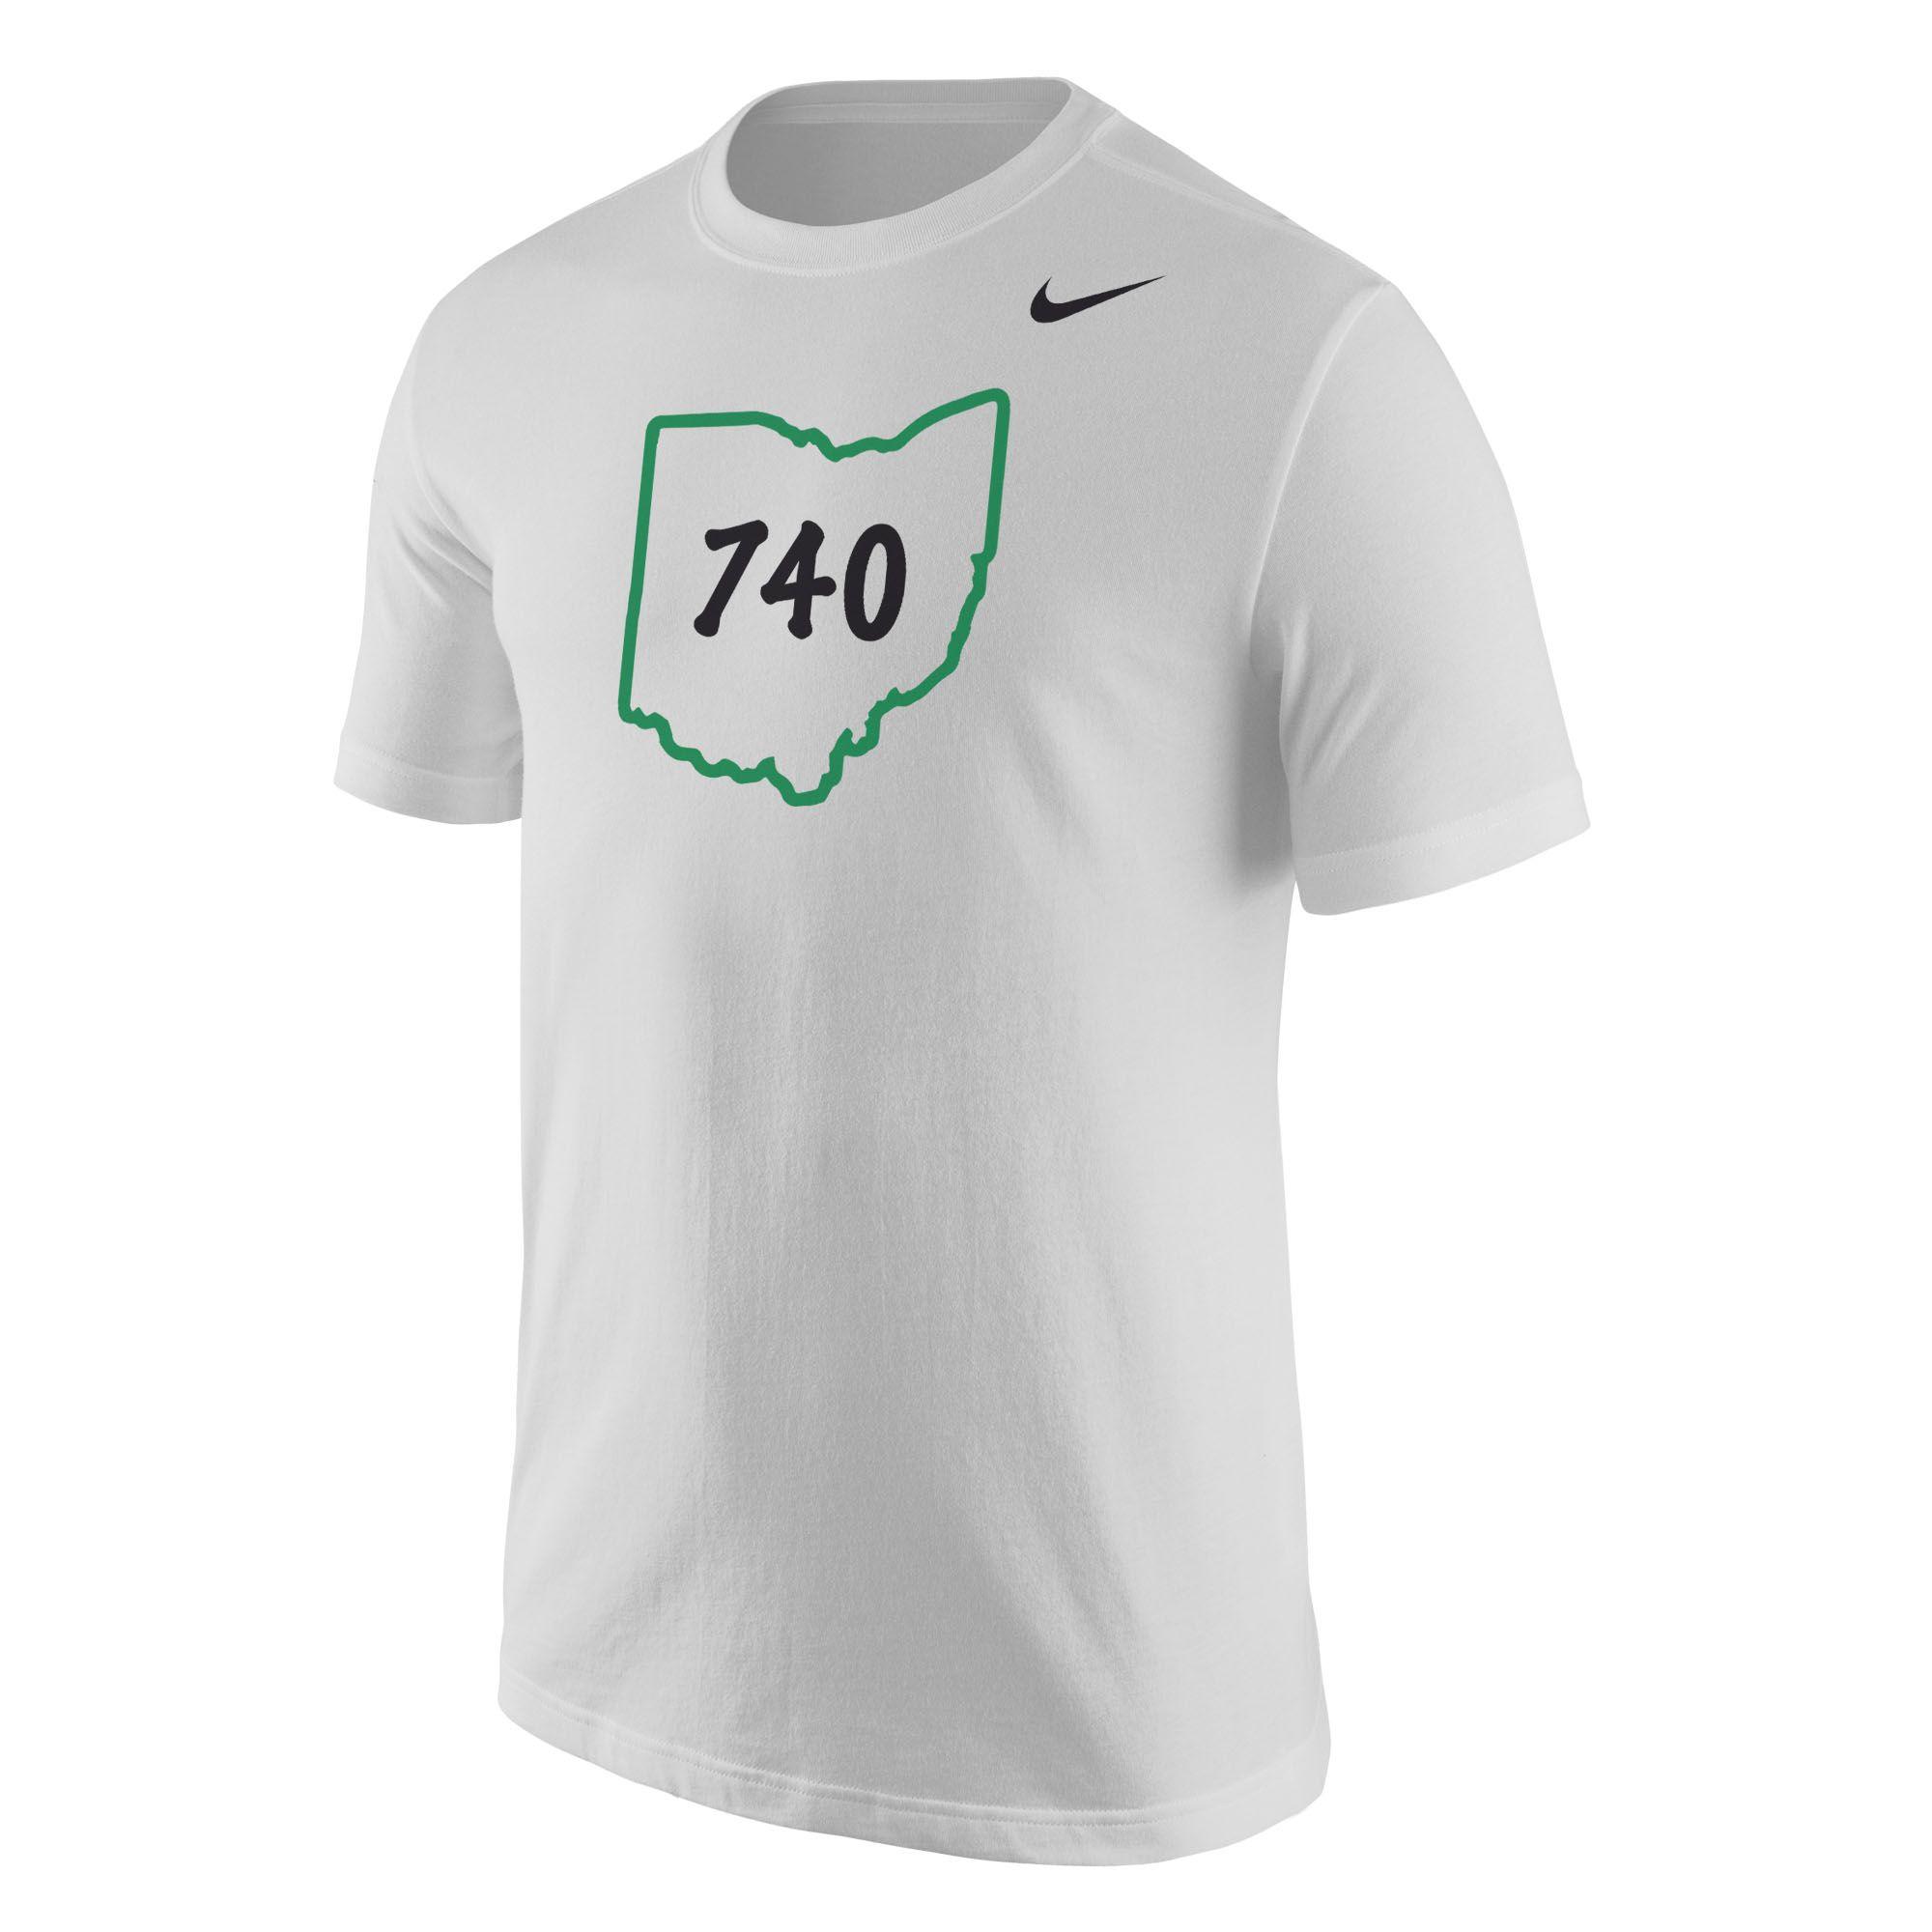 Nike 740 Area Code T-shirt in Gray for Men - Lyst